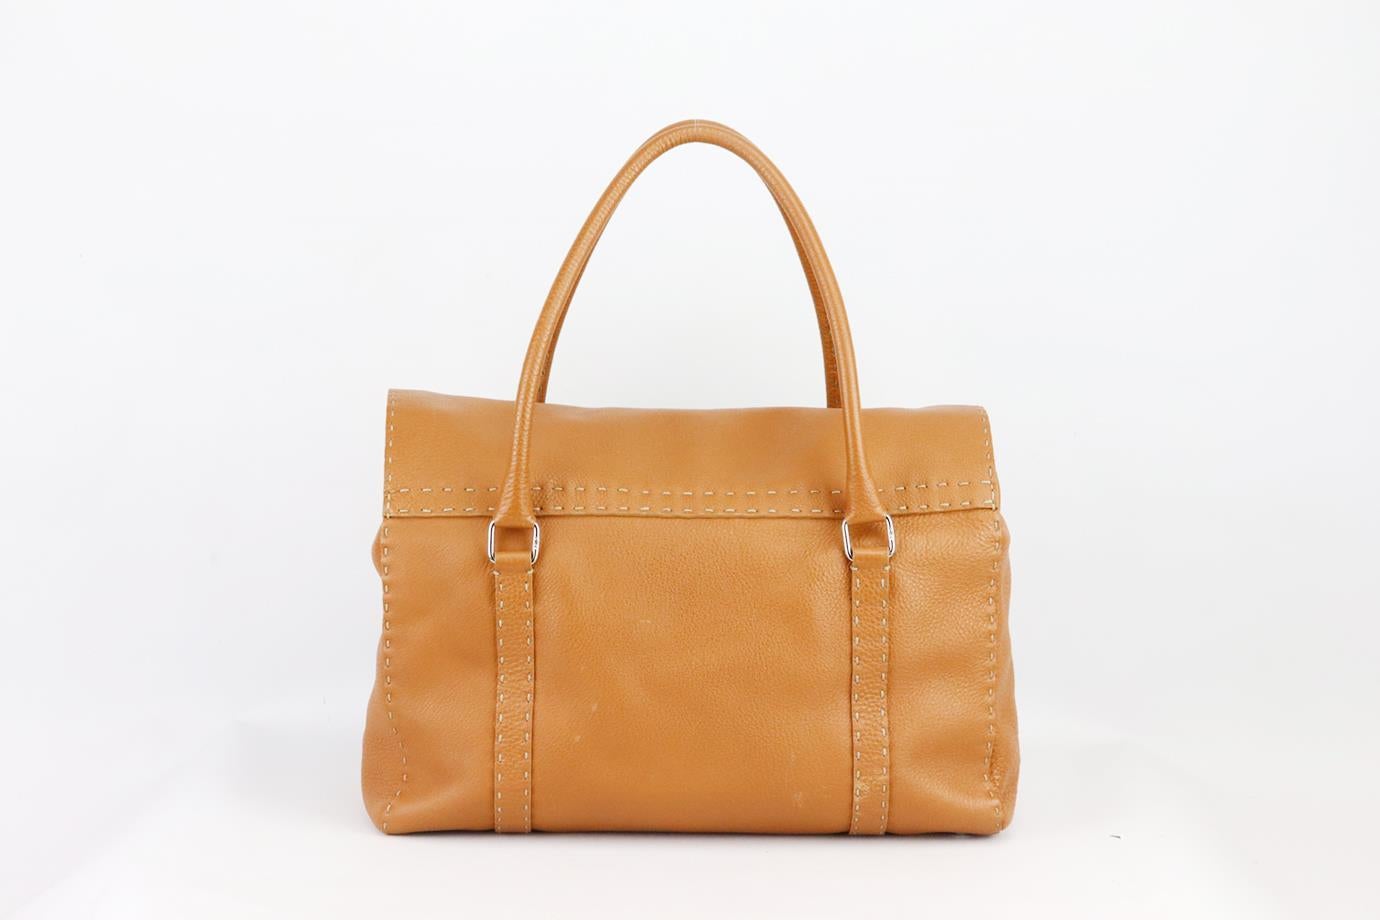 Fendi Linda Selleria large textured leather shoulder bag. Made from tan textured-leather with contrast stitching and buckle detail on the front, it has a large interior compartment with zipped pocket. Tan. Magnetic fastening at front. Does not come